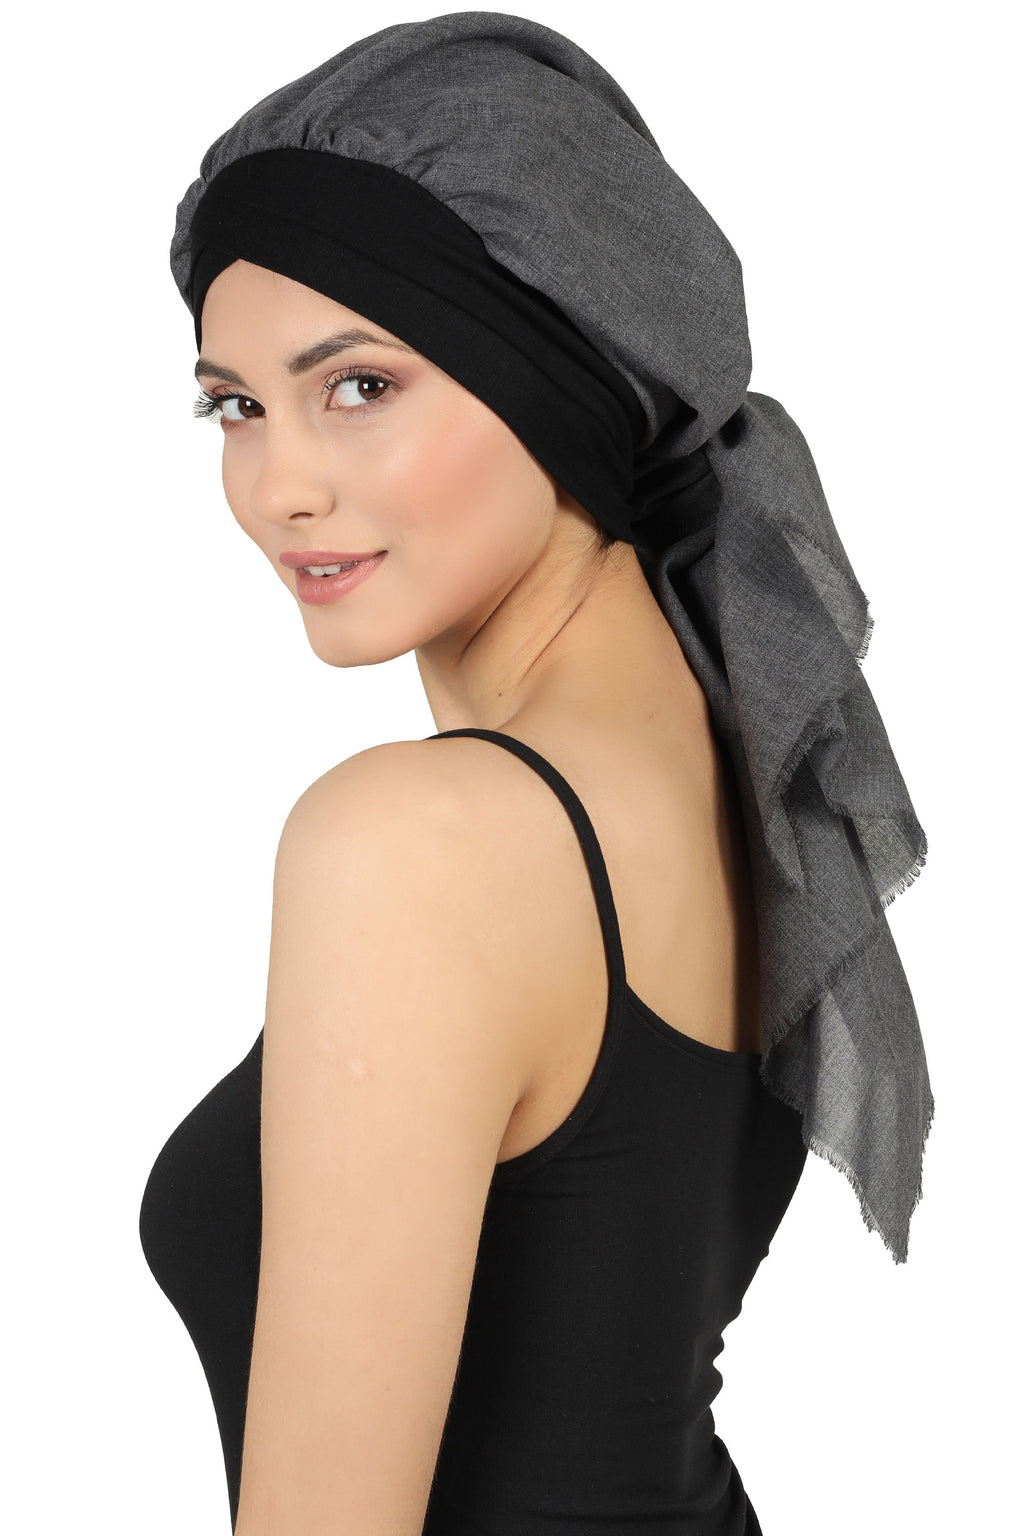 W Front Cap with Attached Scarf (Black Plain)